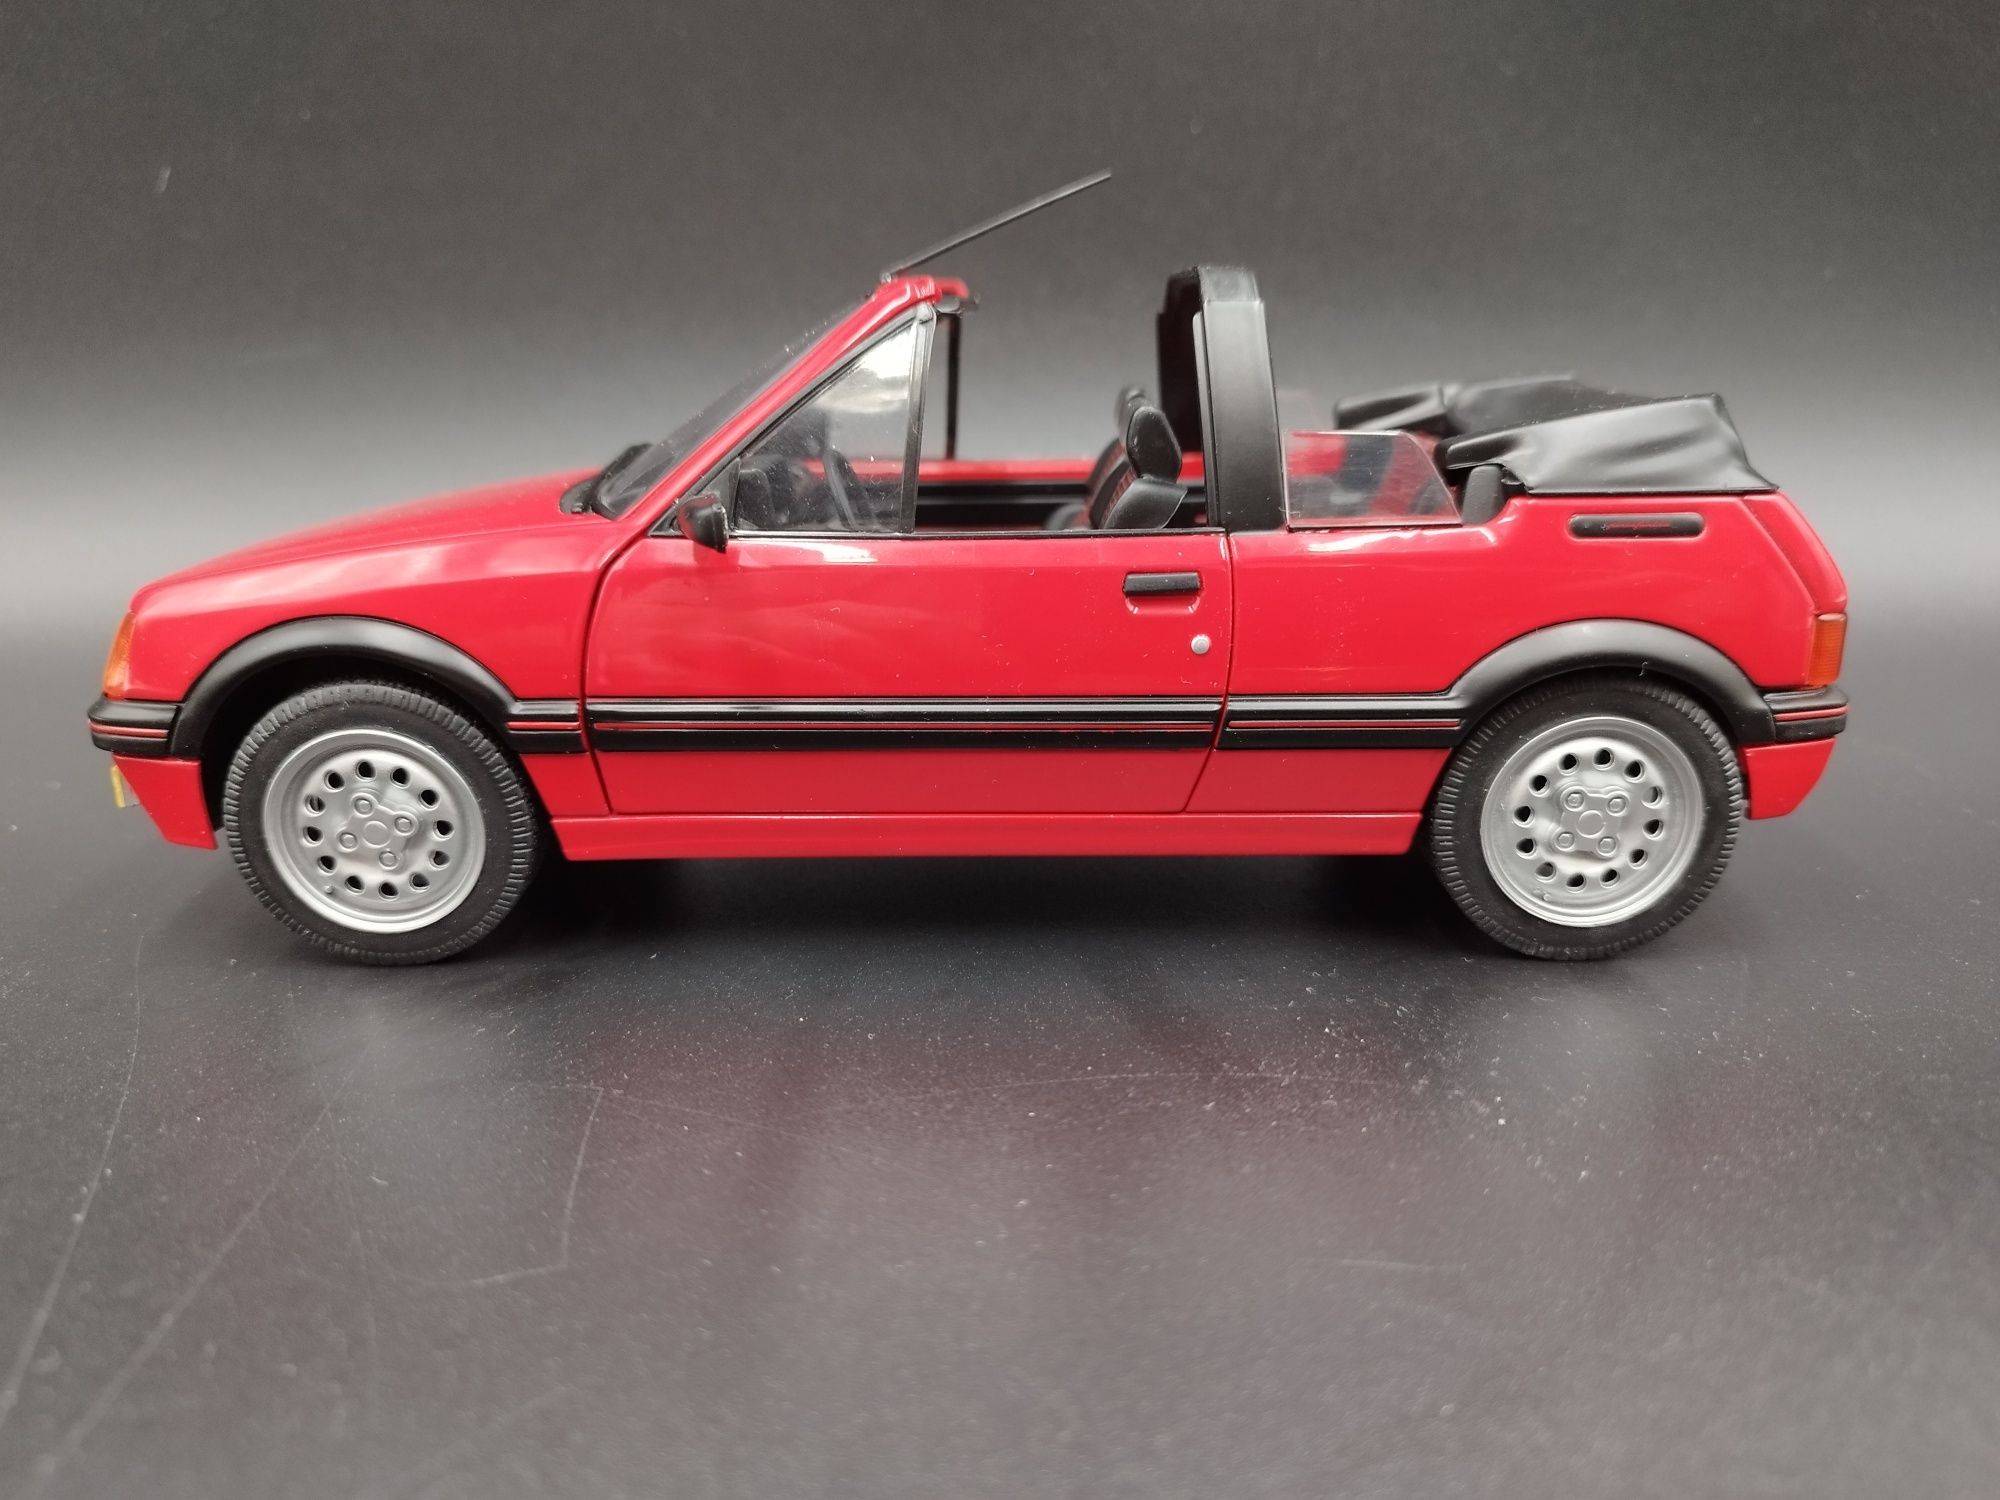 1:18 Solido 1989 Peugeot 205 CTI Mk. Red model nowy